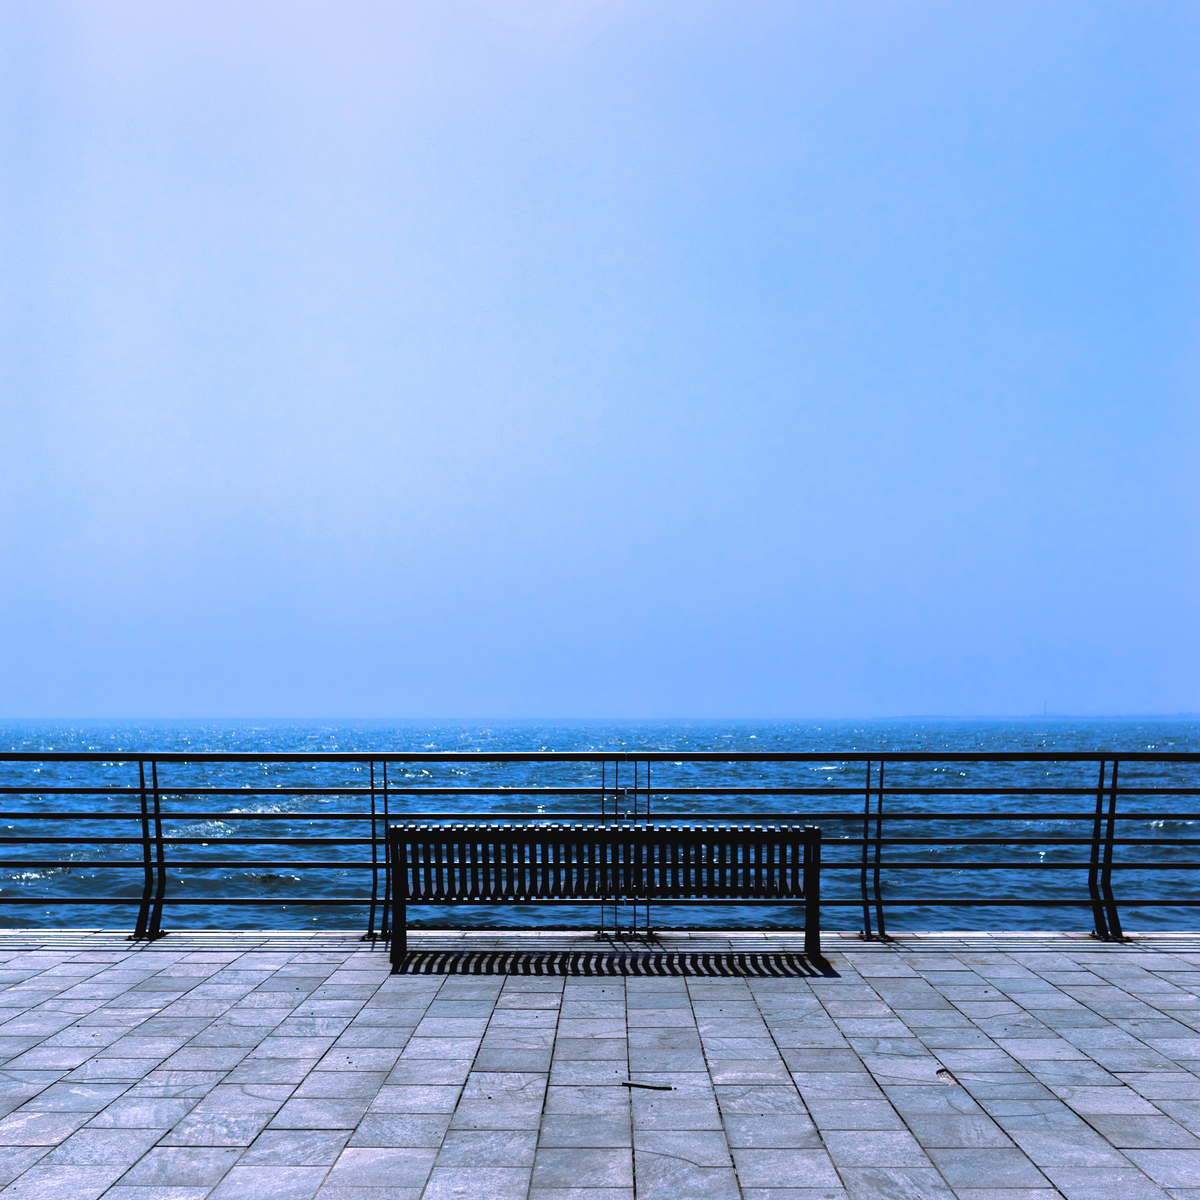 Photo of a bench in front of a cobalt blue ocean